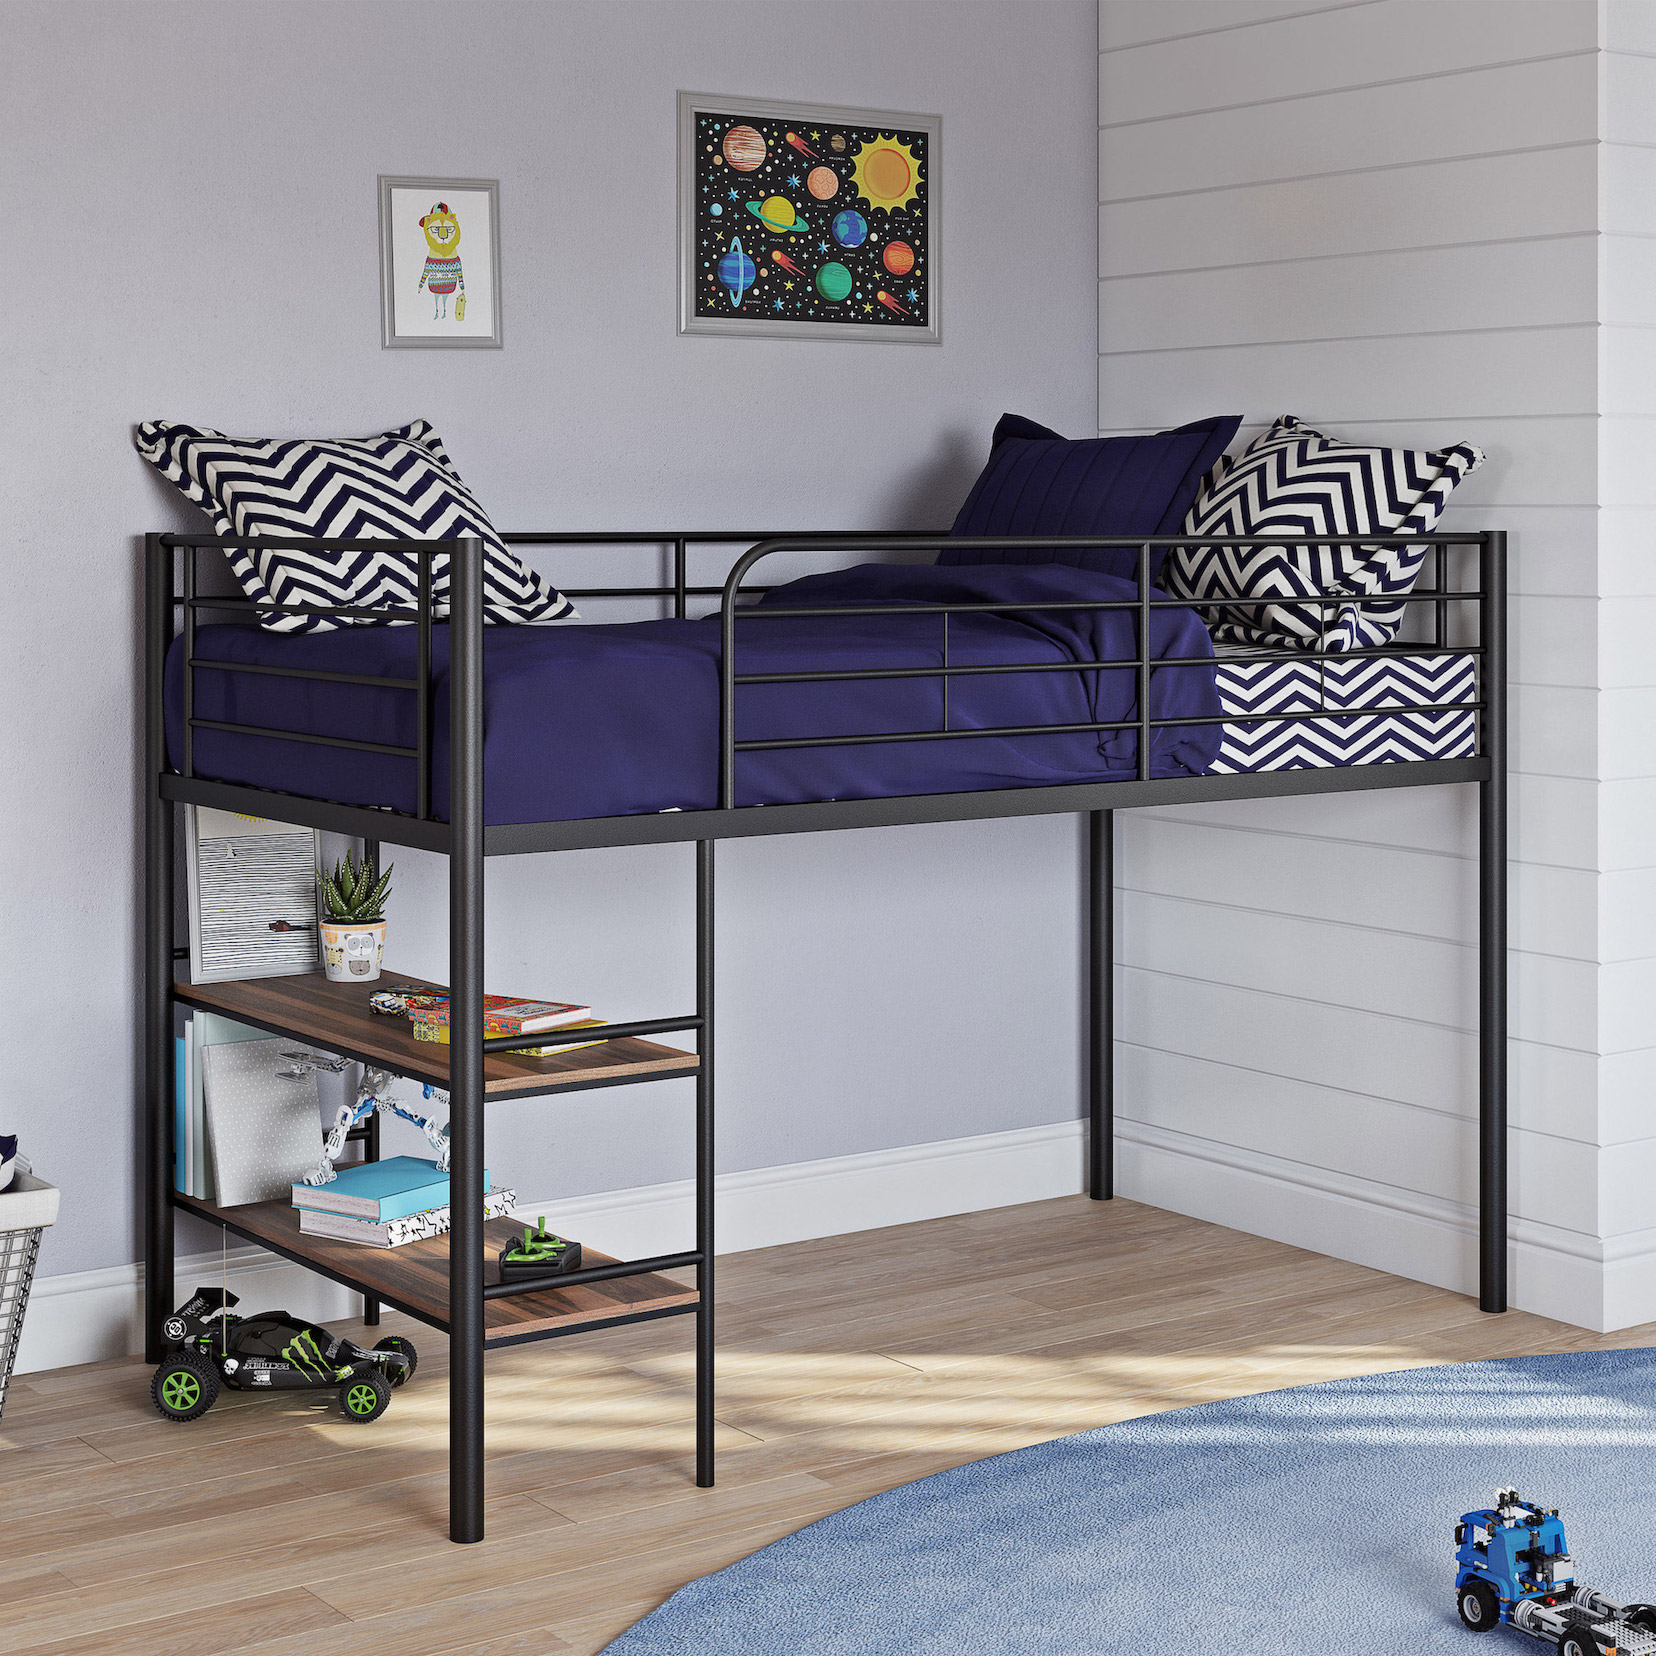 14 Space Saving Loft Beds Kids, At What Age Can A Child Sleep In Loft Bed